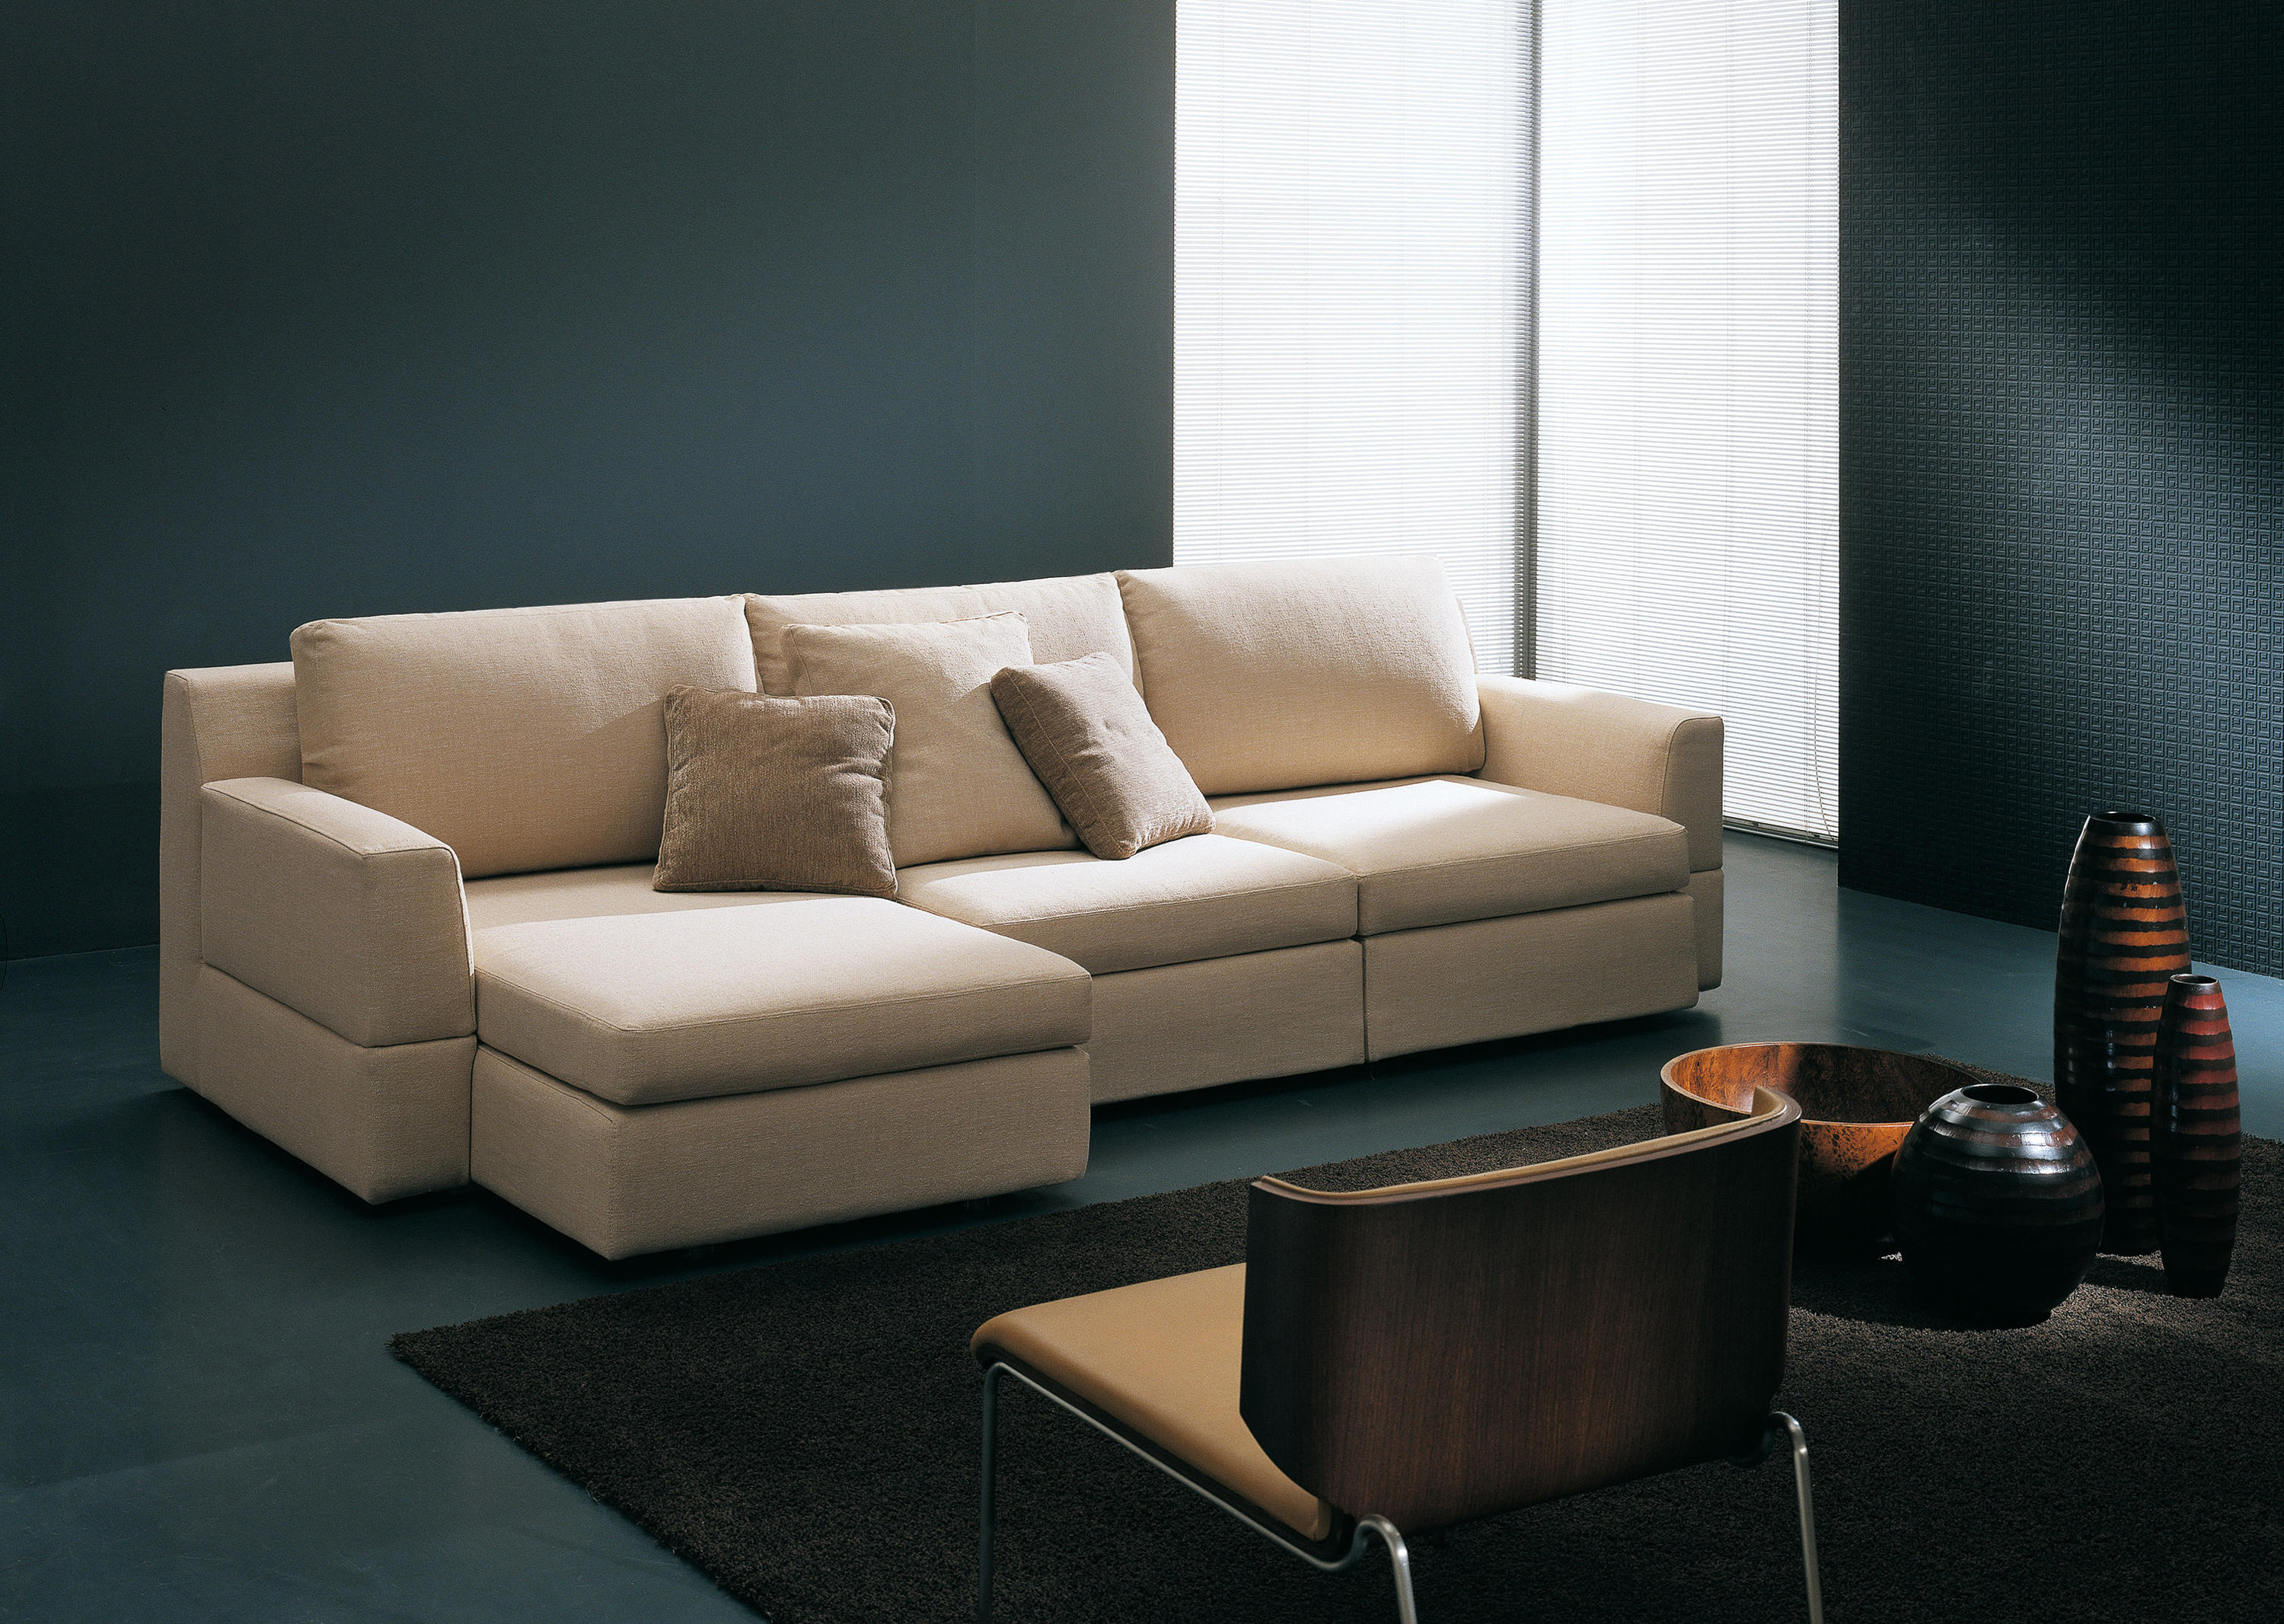 Wilson Sofas From Bodema Architonic, Wilson Pull Out Sleeper Sofa Bed